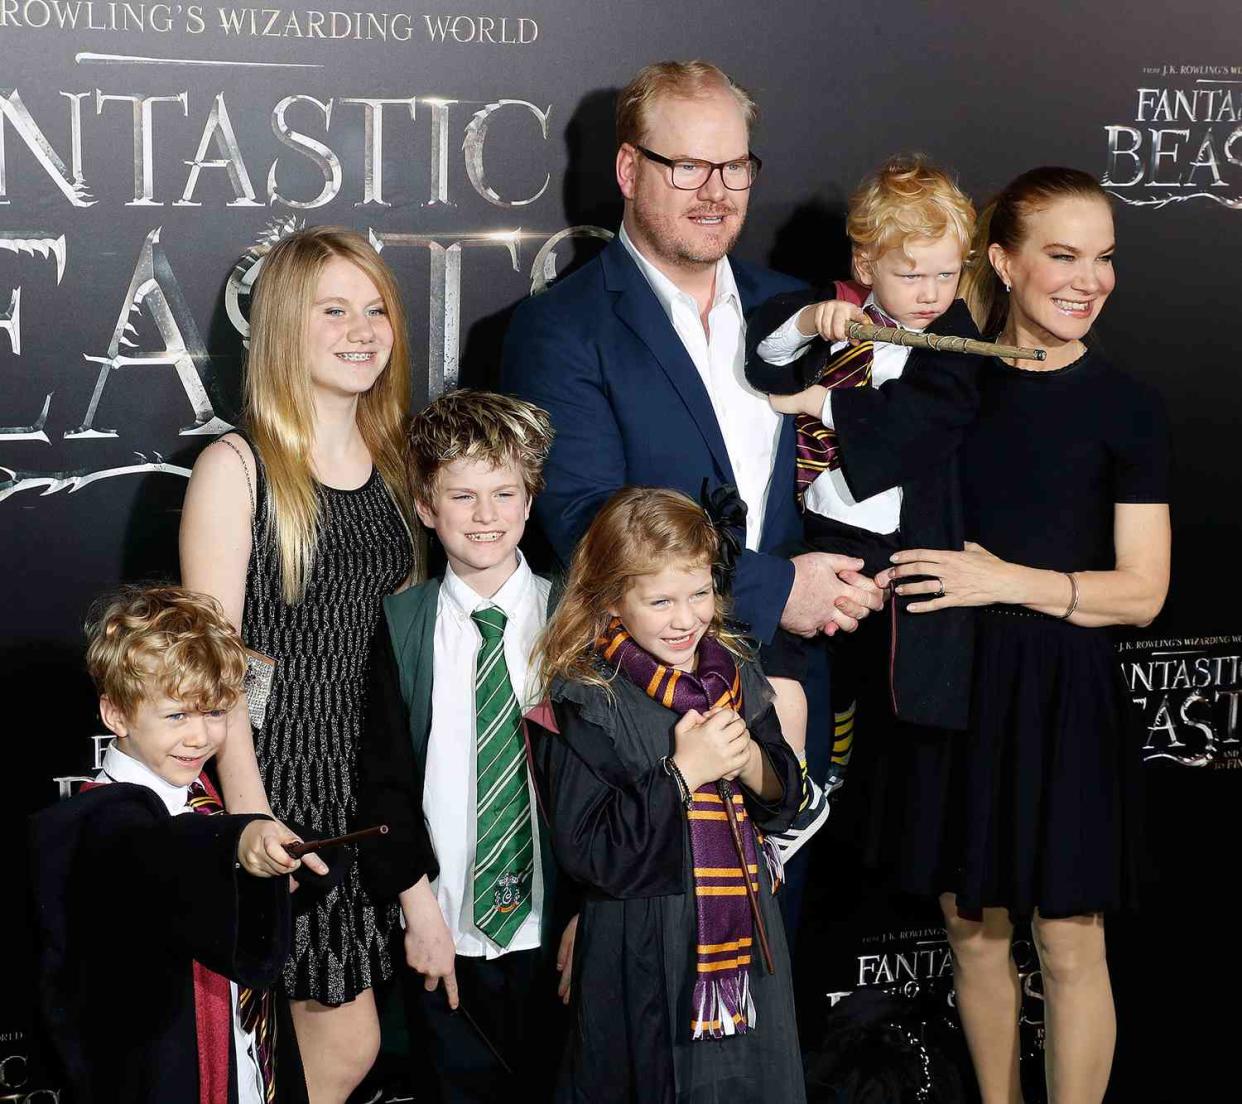 Jim Gaffigan, Jeannie Gaffigan, and family attend the premiere of "Fantastic Beasts and Where to Find Them" at Alice Tully Hall, Lincoln Center on November 10, 2016 in New York City